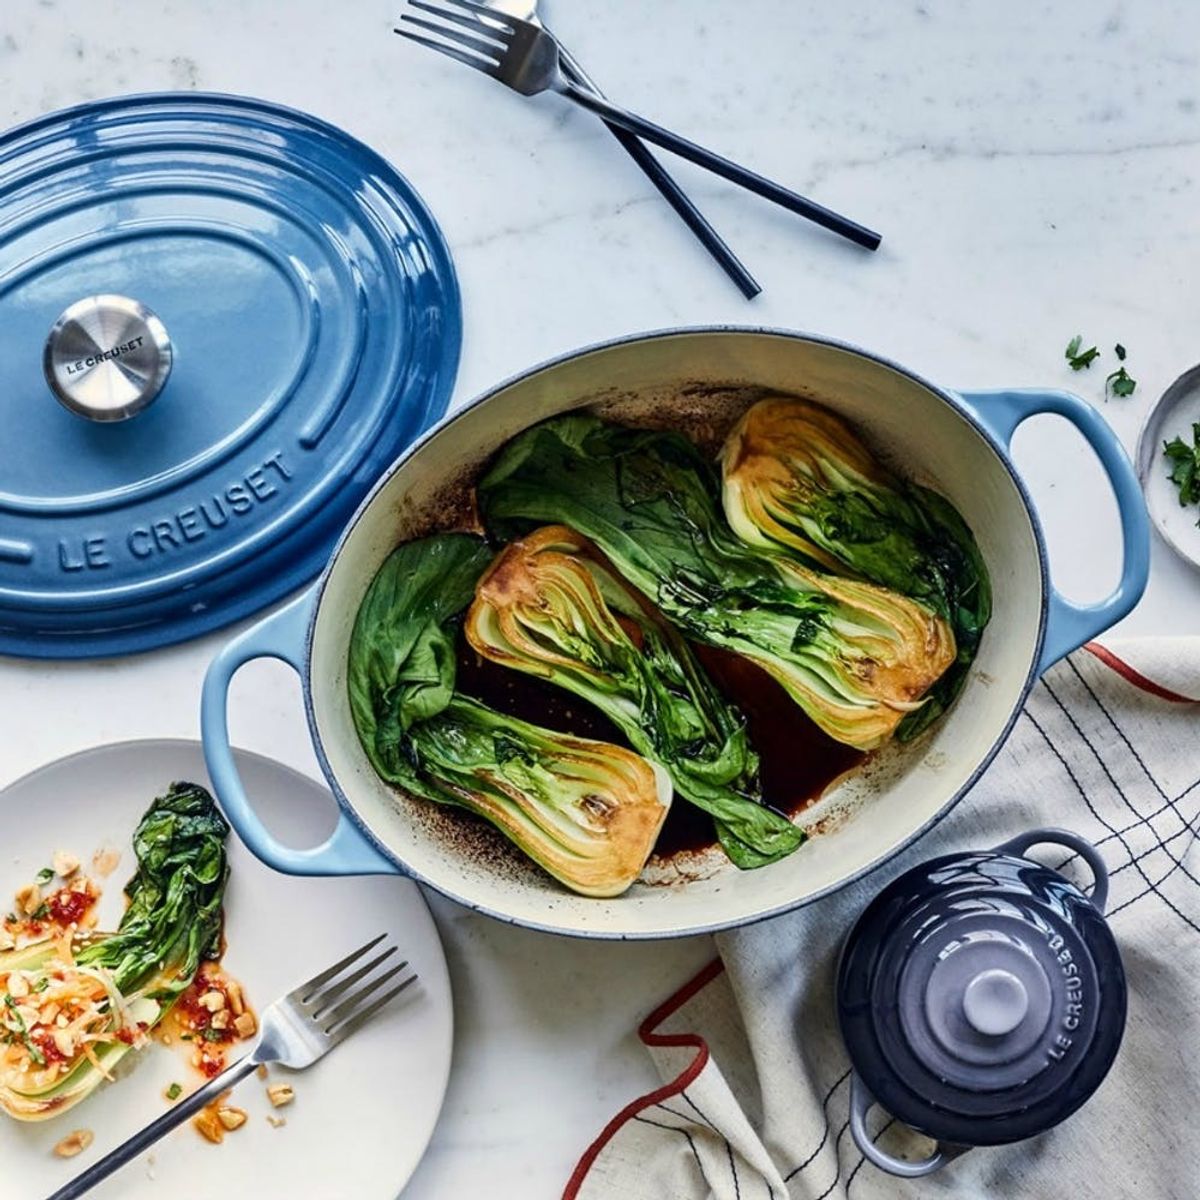 Here’s How to Correctly Pronounce Le Creuset